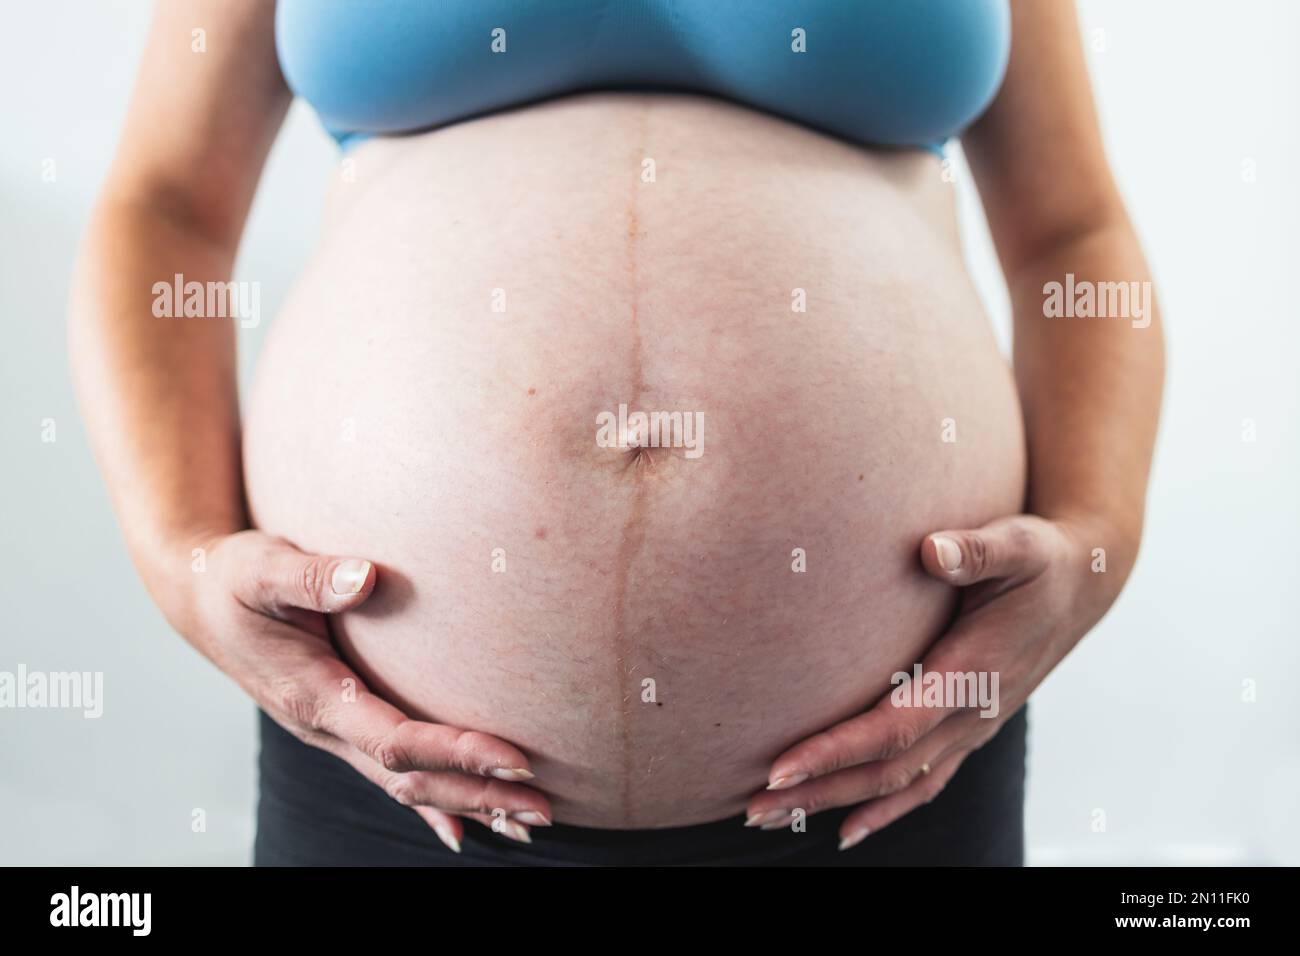 pregnant woman touching her bump in the latest stage of pregnancy, mid-section showing the belly and body shape with no face in the frame Stock Photo